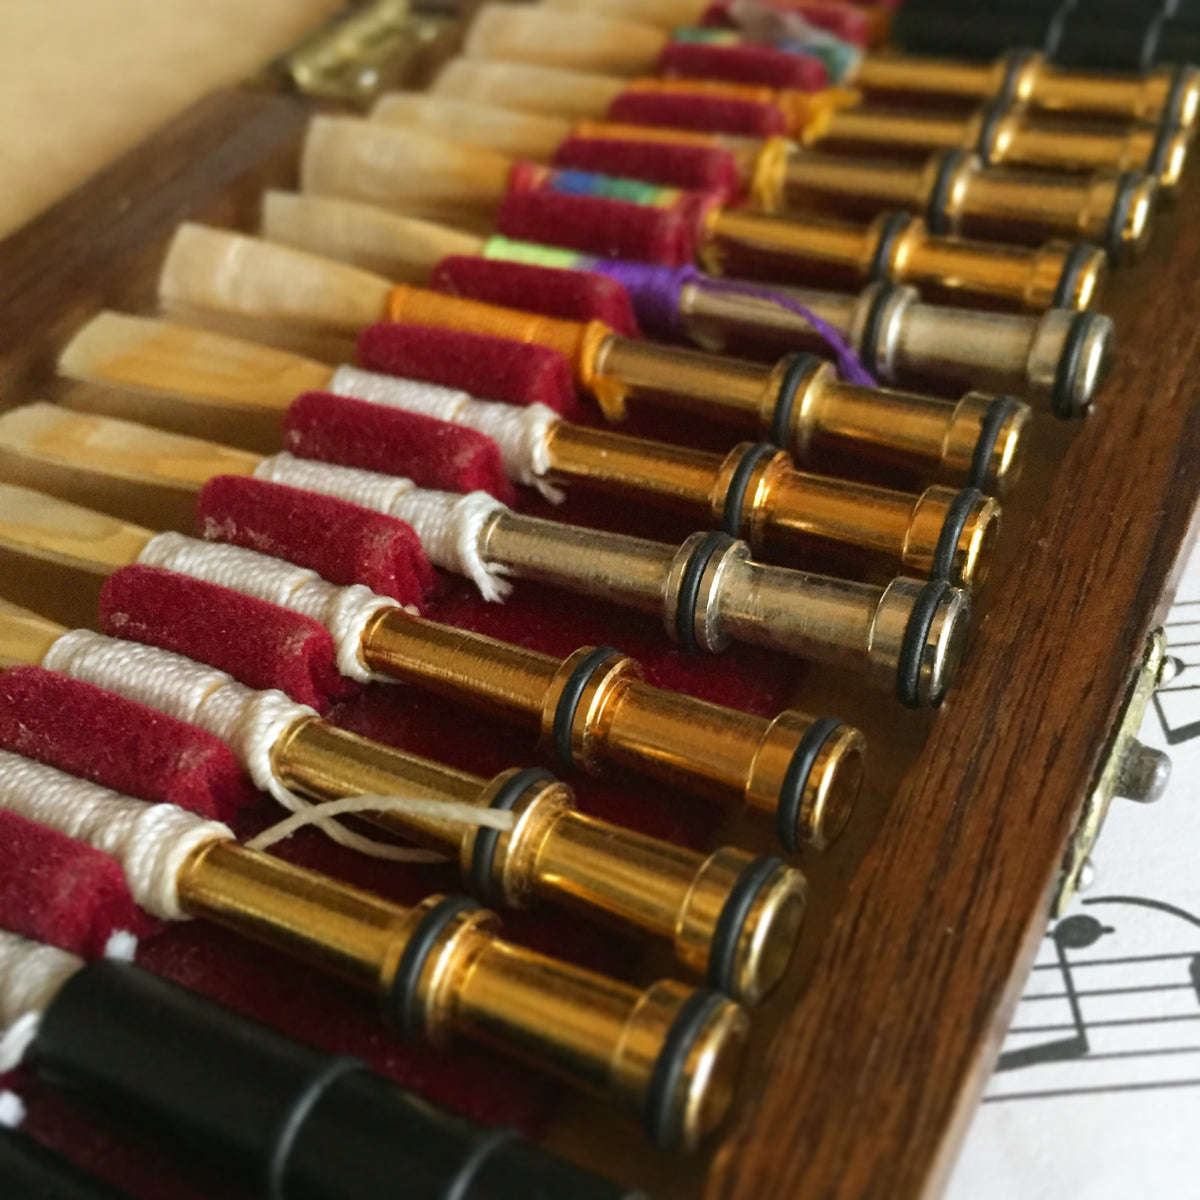 Oboe reed cases